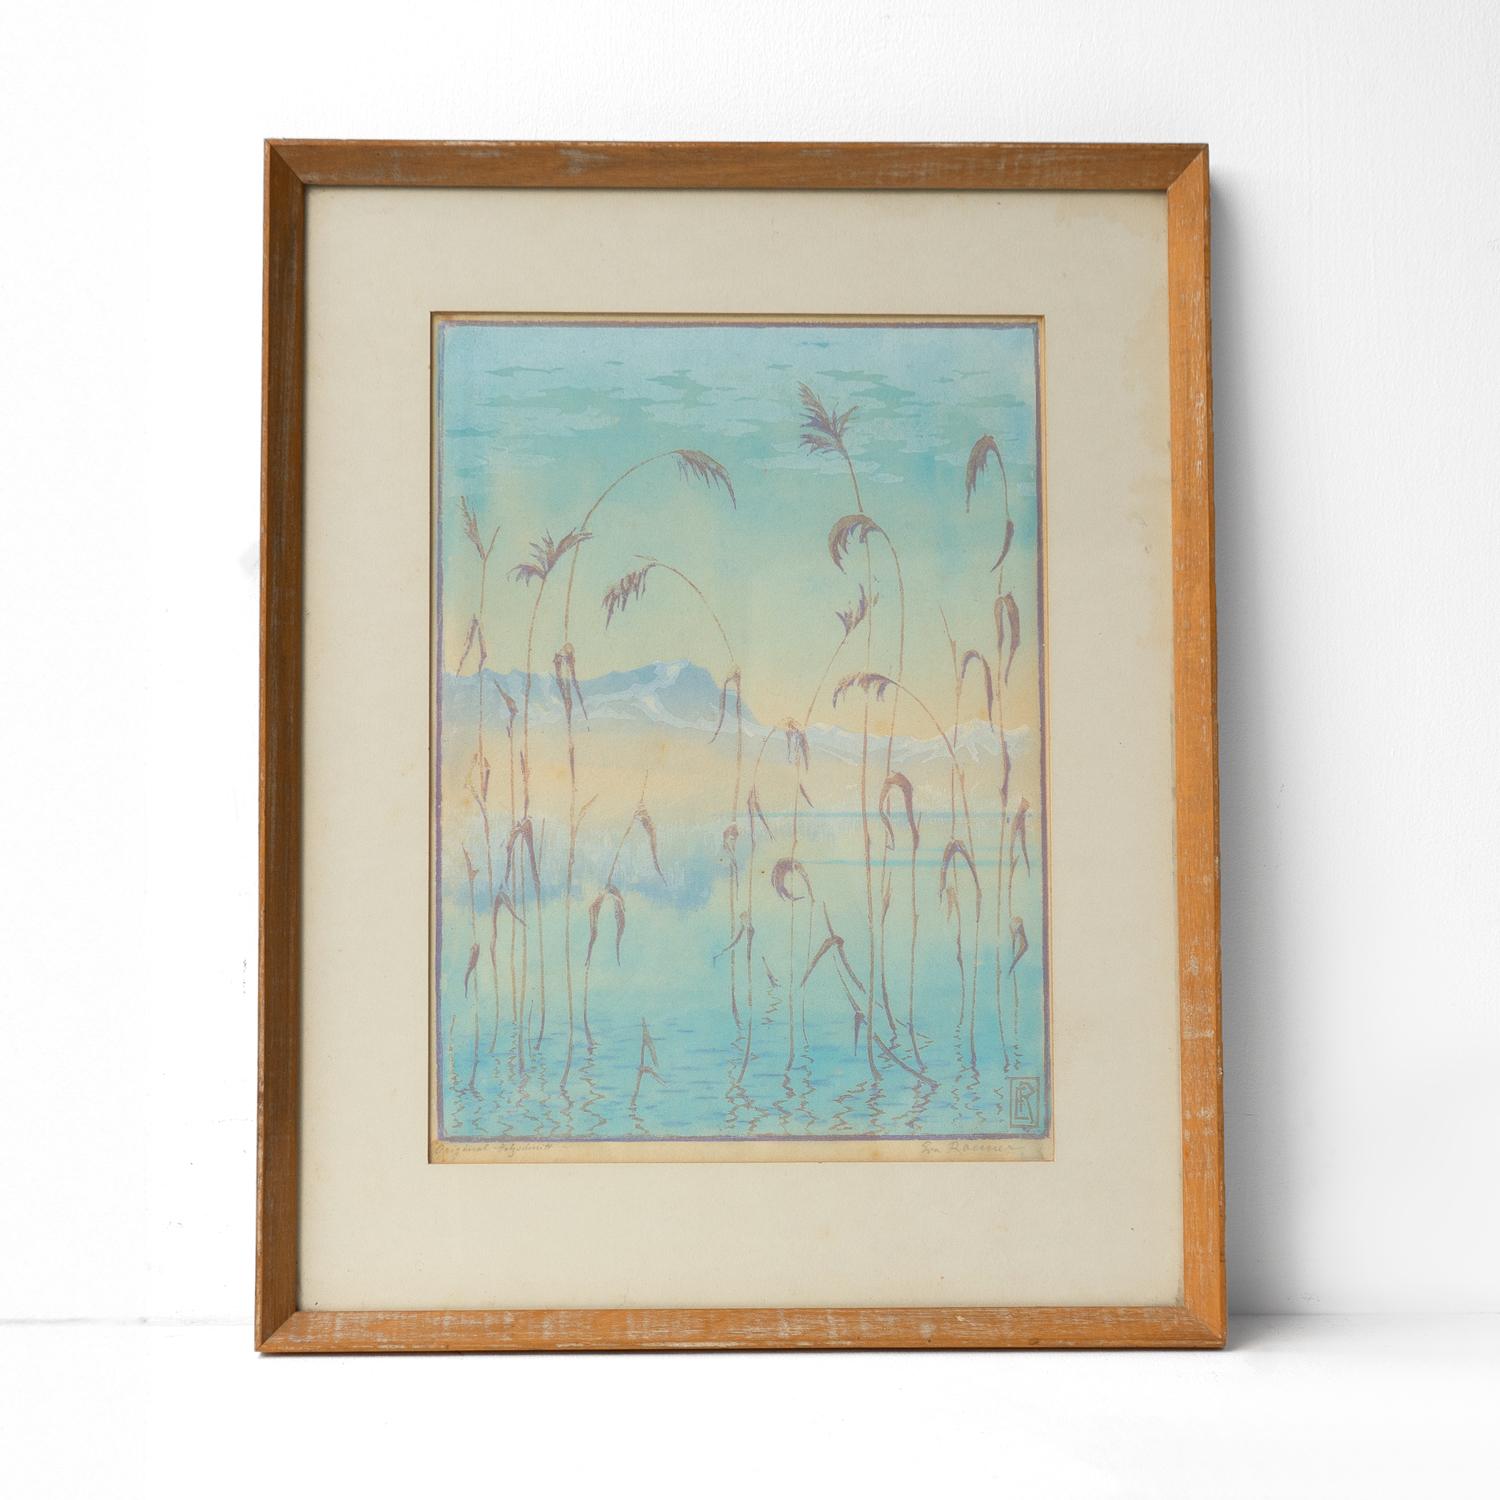 VINTAGE FRAMED WOODCUT PRINT BY EVA ROEMER (1889-1977)
Depicting a dreamy landscape scene looking through the foliage in the foreground over a lake to mountains in the background using a typically pale blue pastel colour palette and expertly